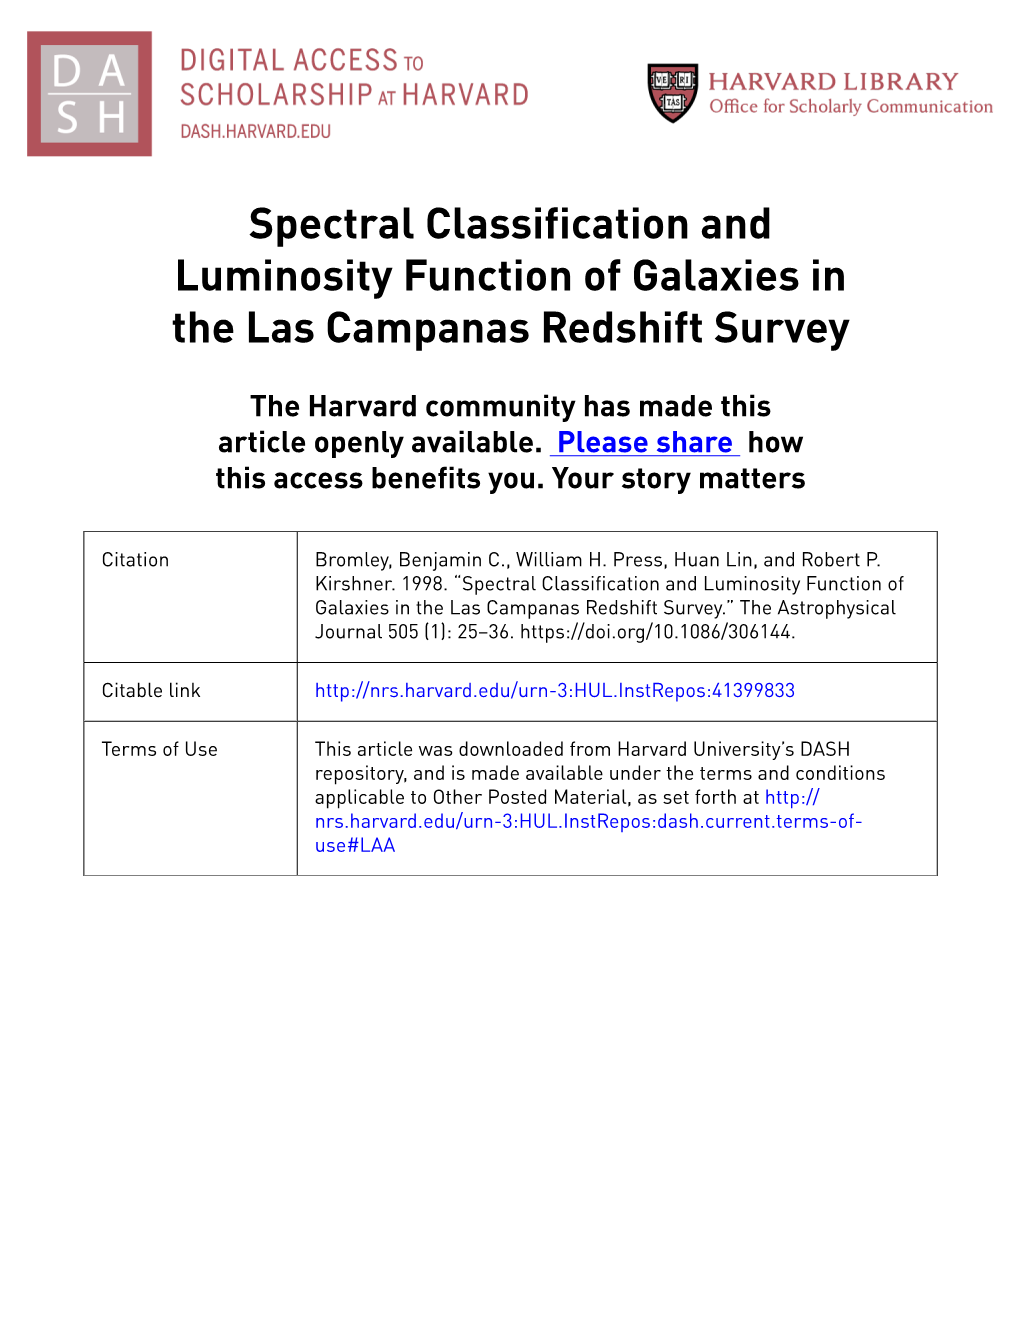 Spectral Classification and Luminosity Function of Galaxies in the Las Campanas Redshift Survey